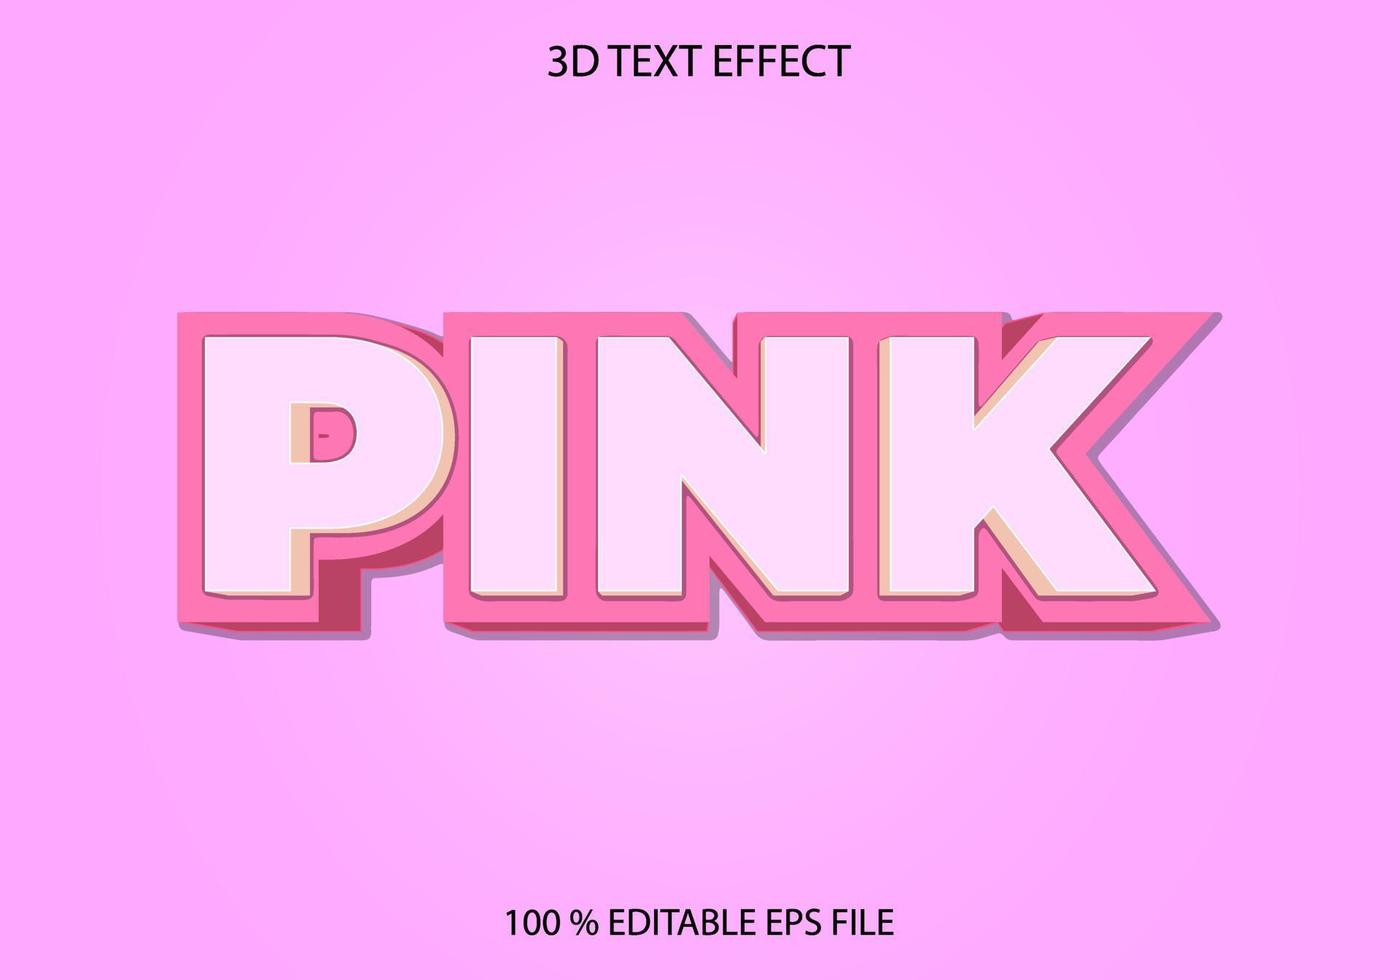 Editable 3d text effect, text effect style, pink editable text effect template vector